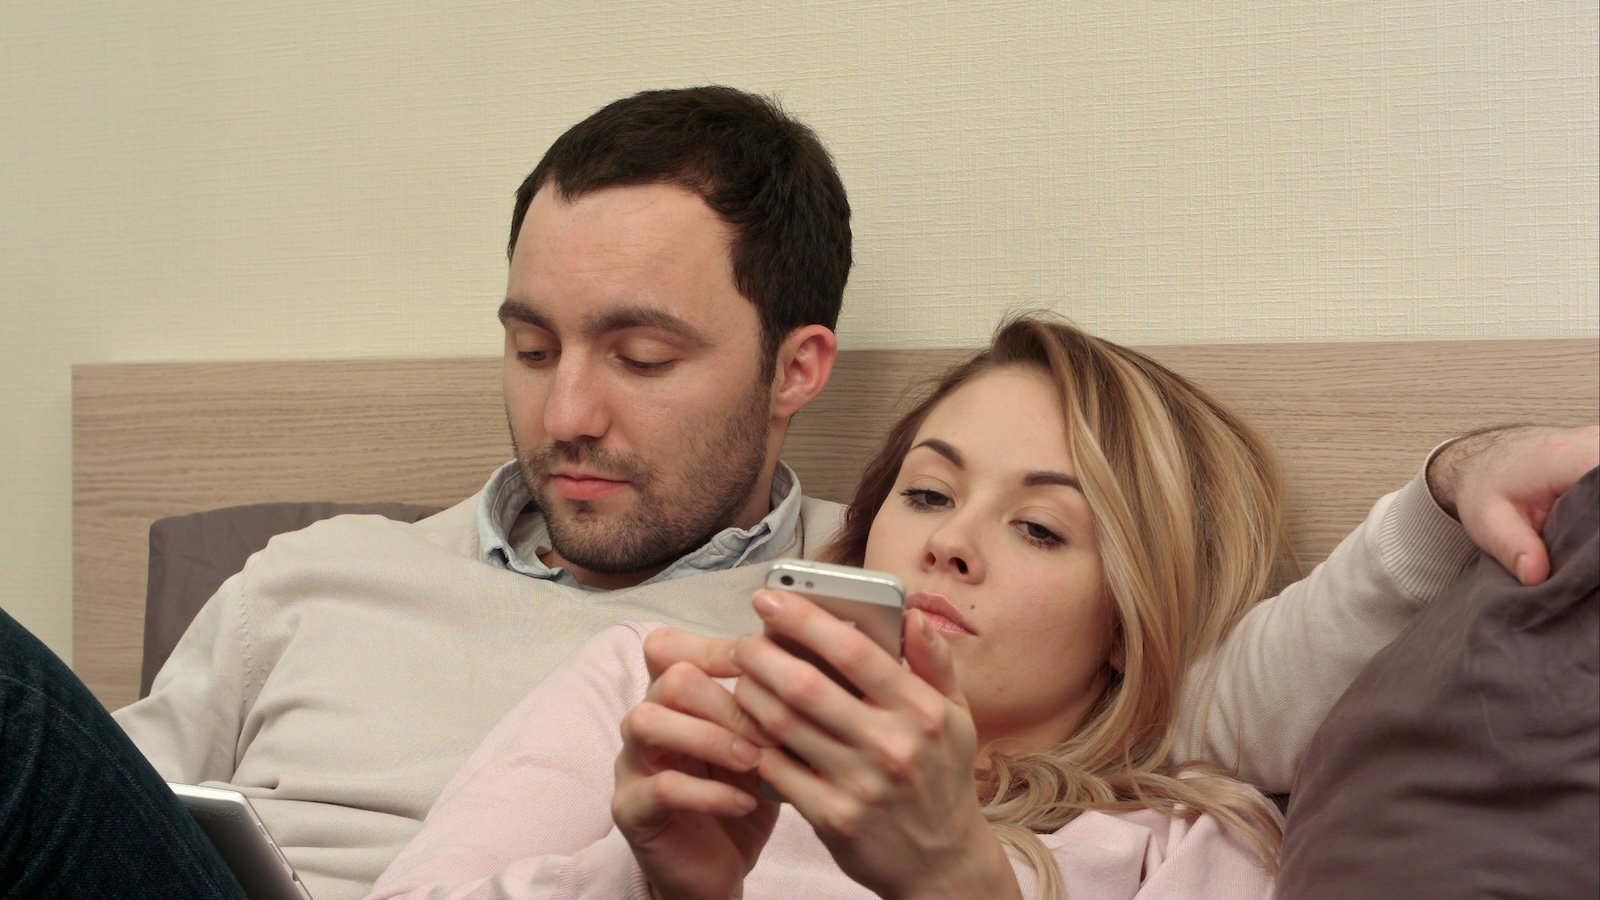 Young couple lying in bed, man using digital tablet, bored woman using smartphone. Close up. Professional shot in 4K resolution. 072. You can use it e.g. in your commercial video, business, presentation, broadcast video.